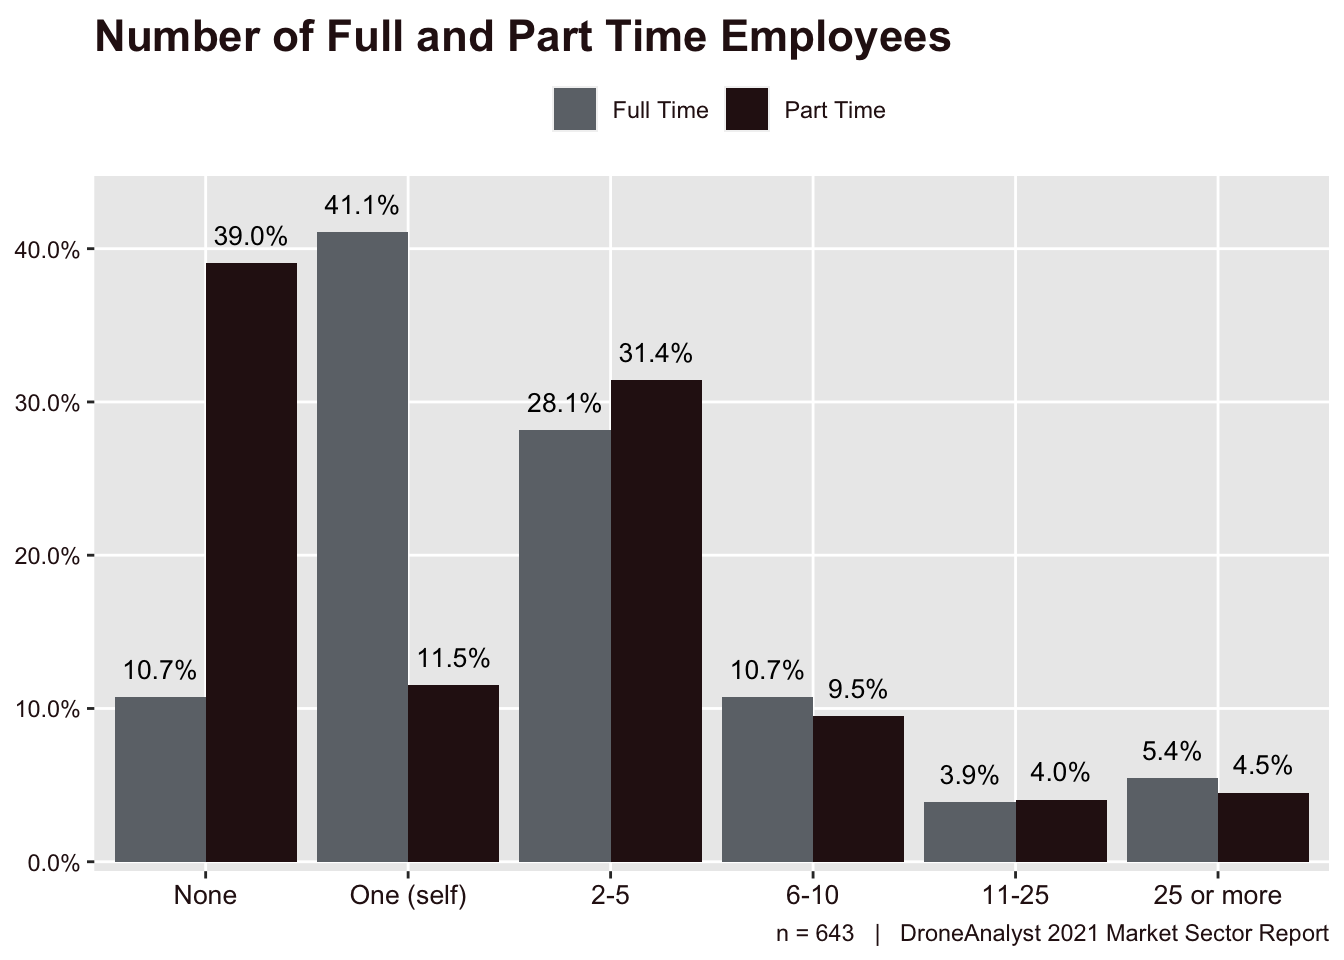 Number of Full and Part Time Employees